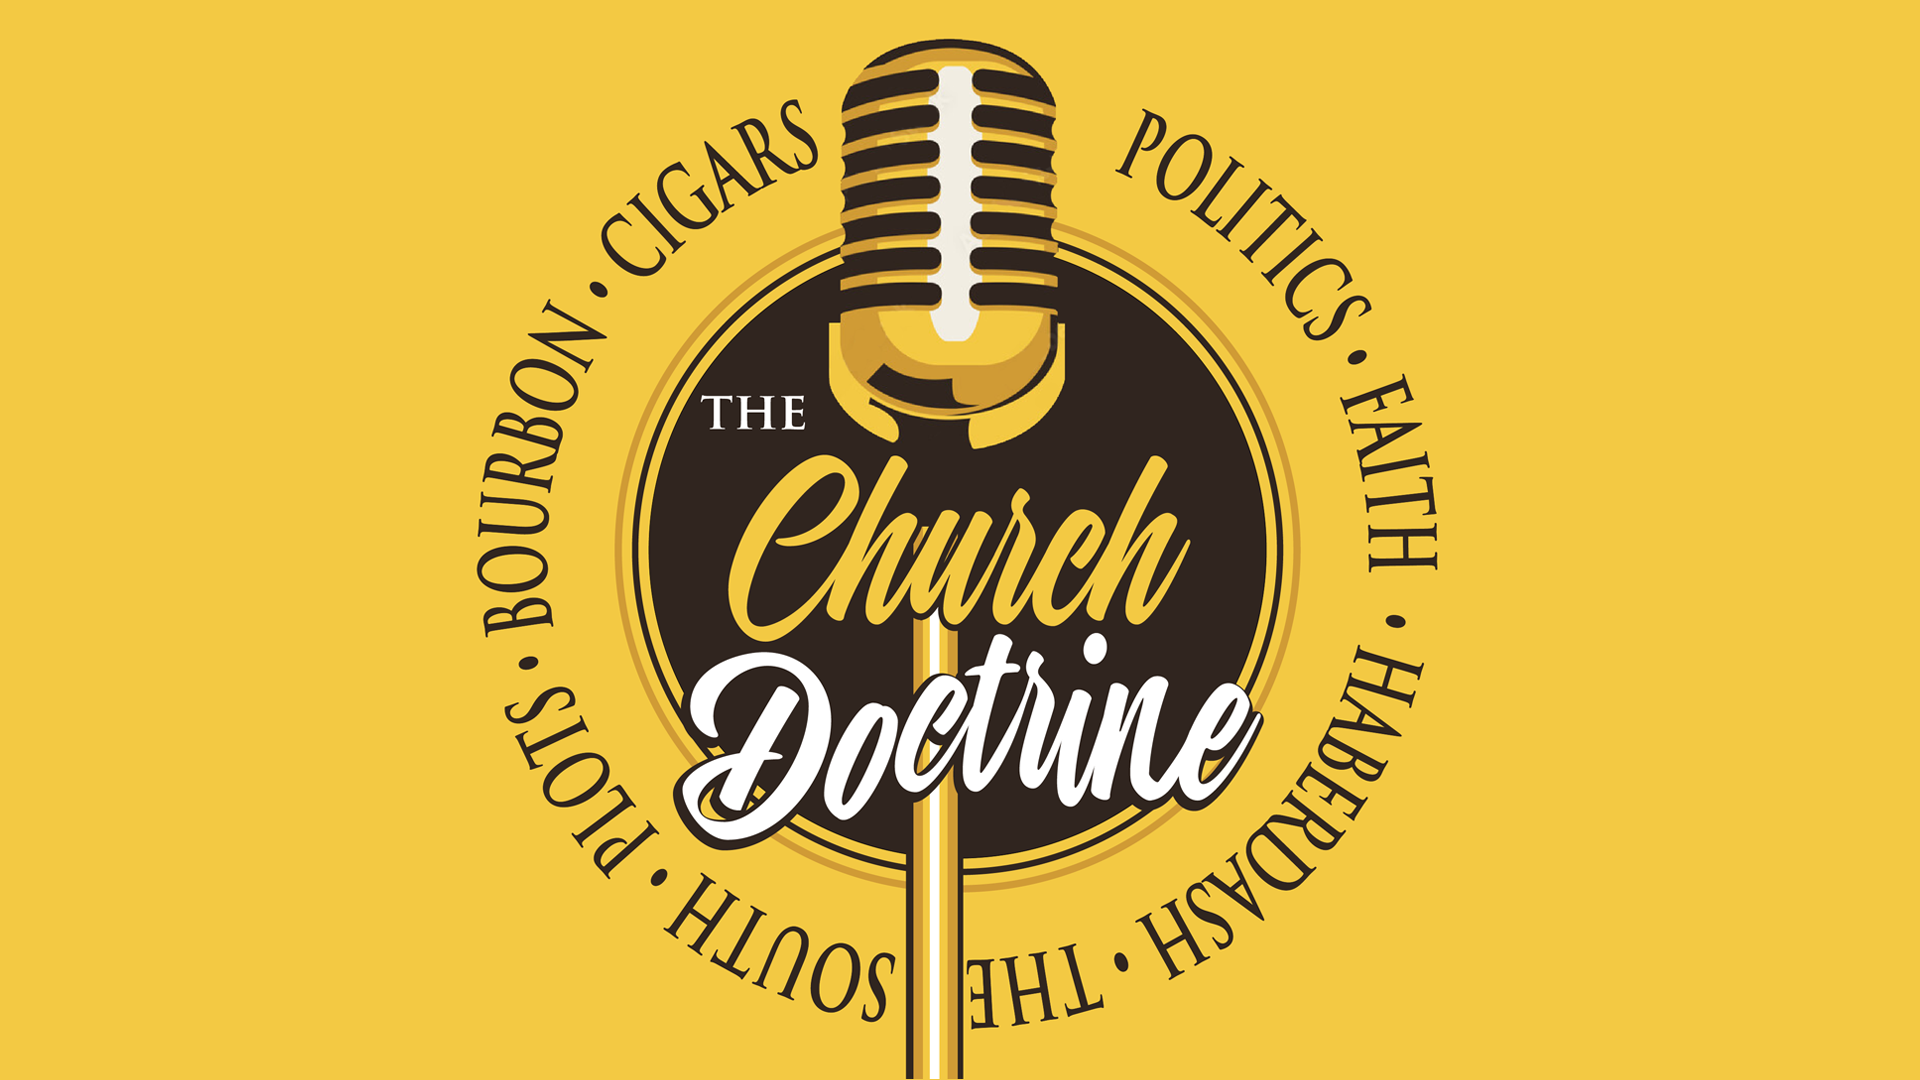 The Church Doctrine-Episode 3-The Hichborner's Guide To The Galaxy